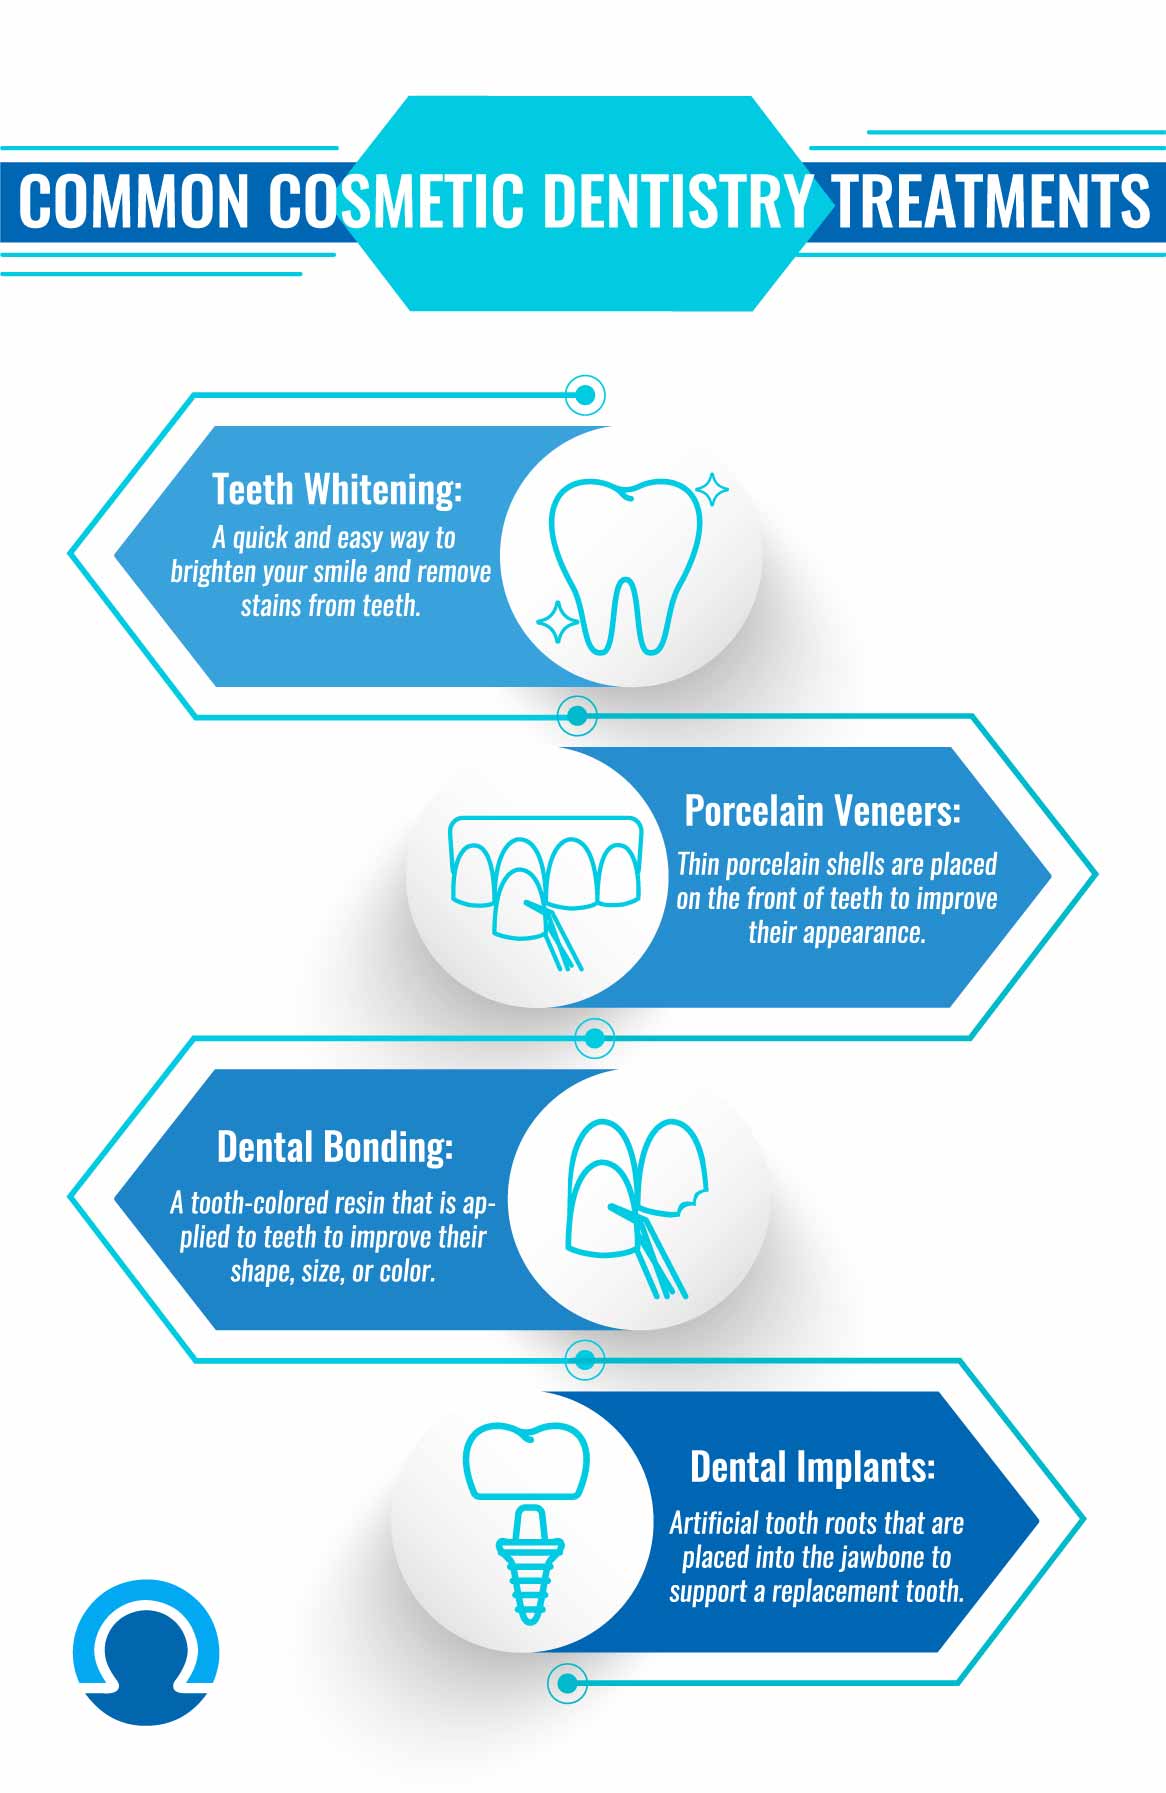 Cosmetic Dentistry Treatments in Houston, Texas